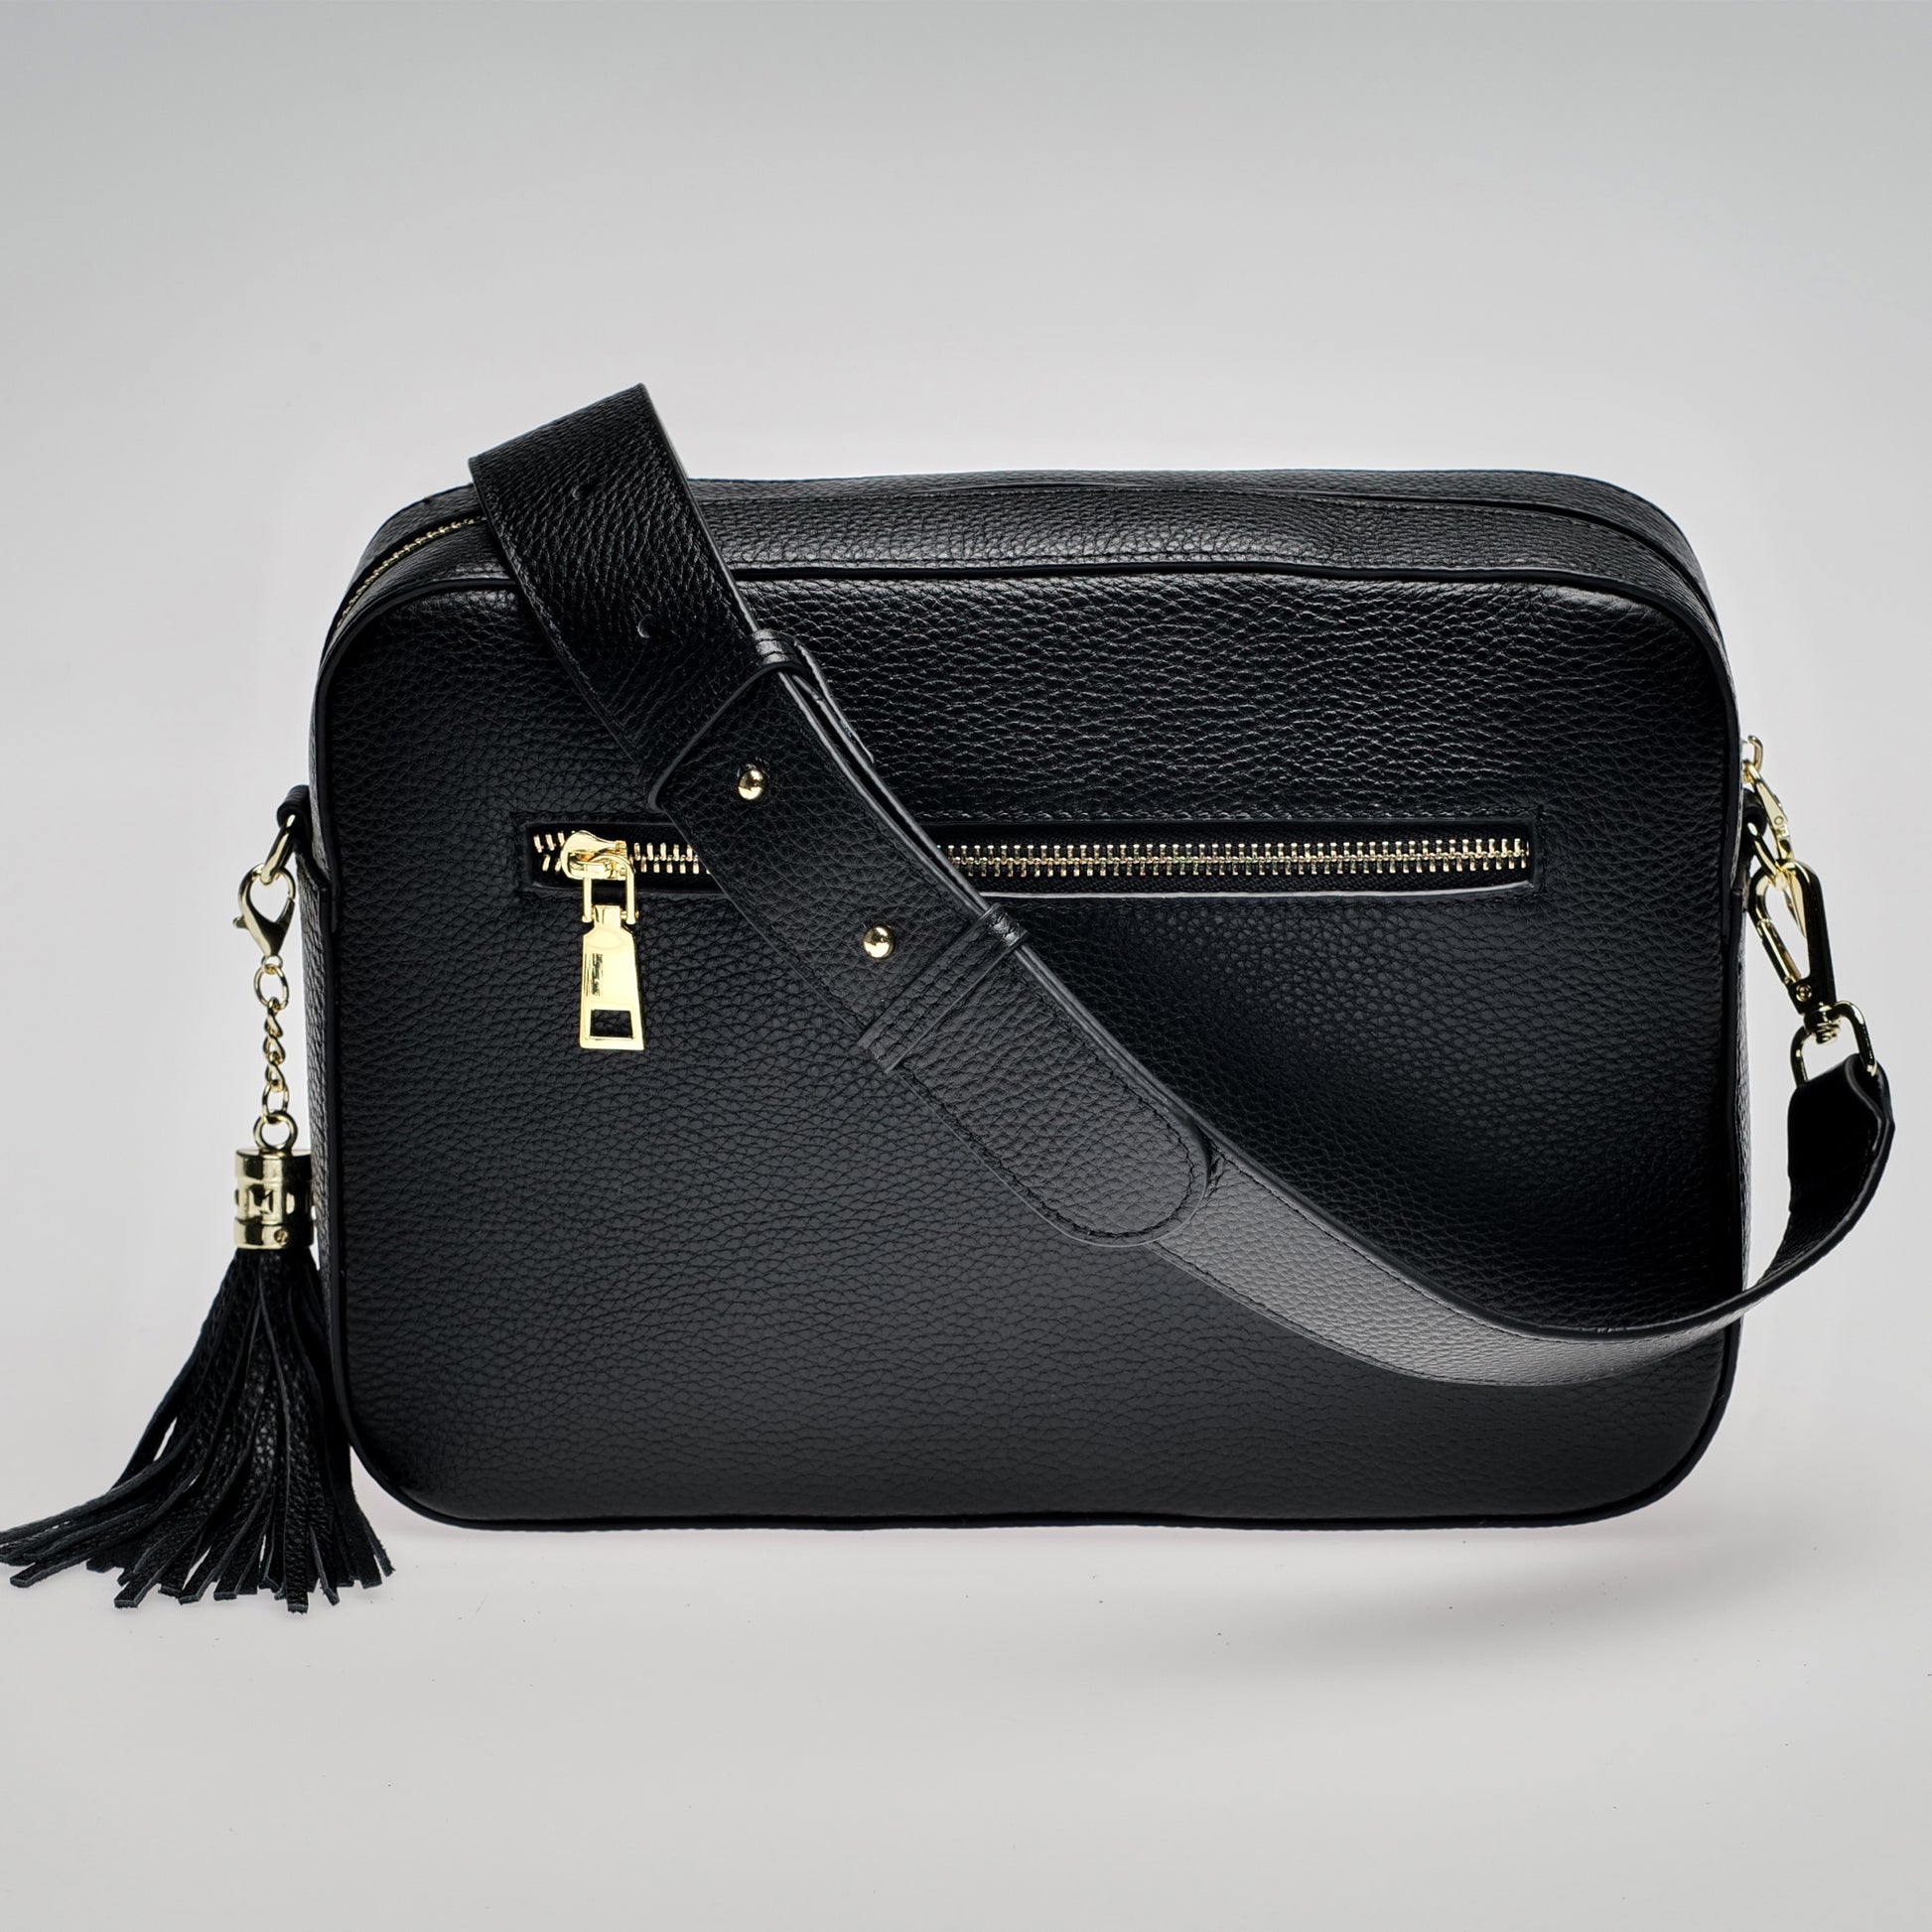 The Stratford XL Leather Crossbody Bag in Midnight Black by Swoon London